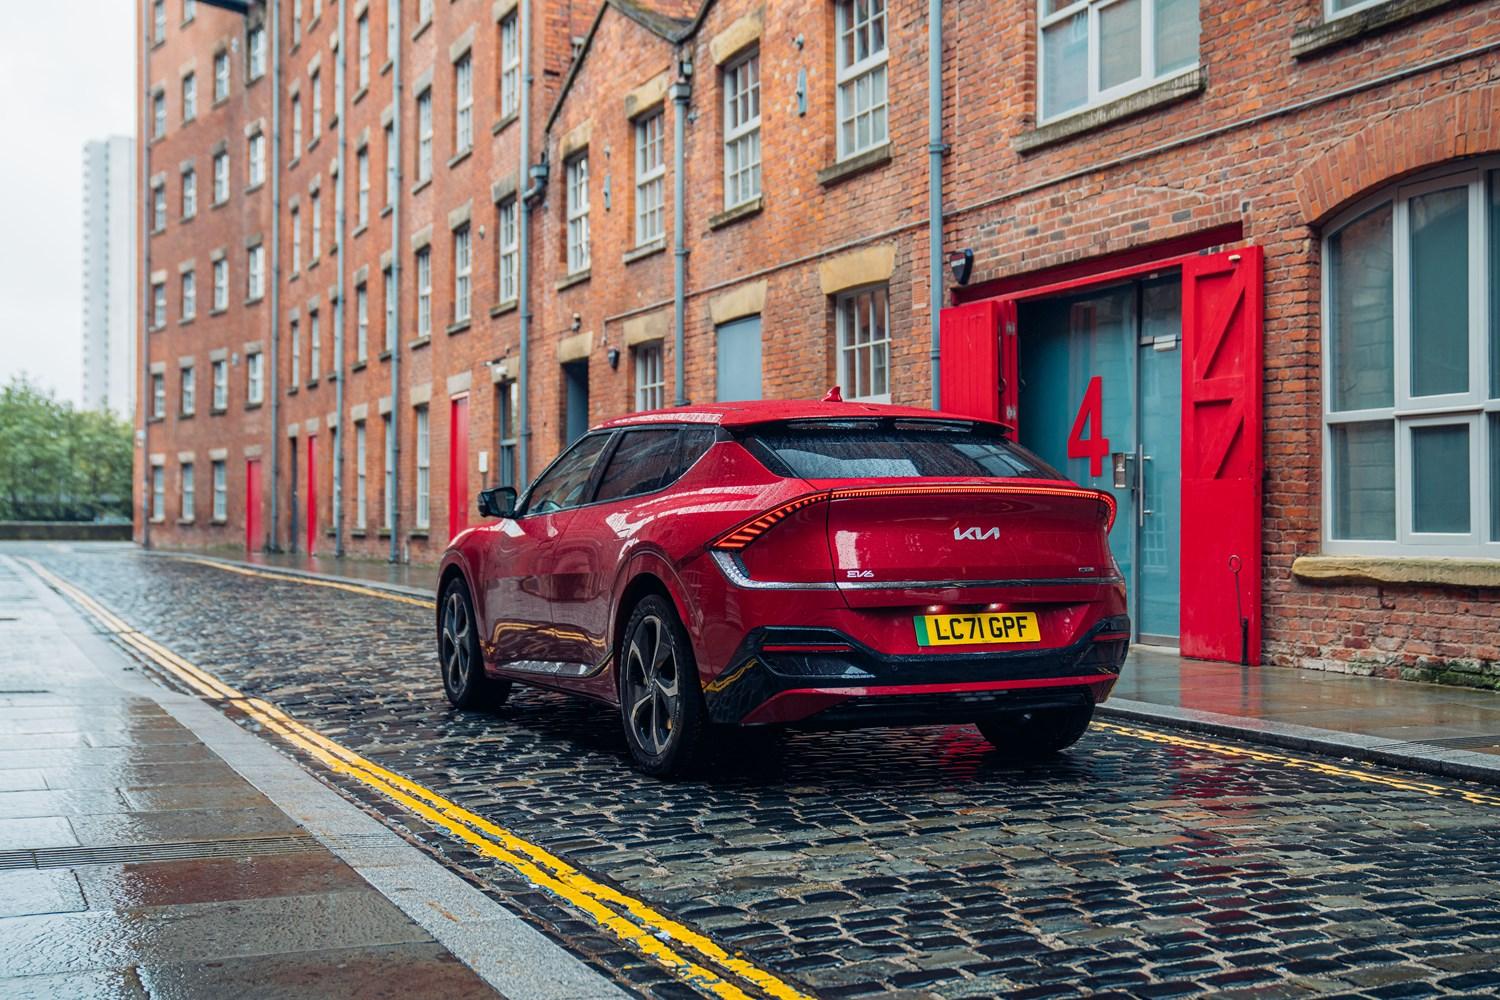 Red EV6 parked outside on a cobbled street